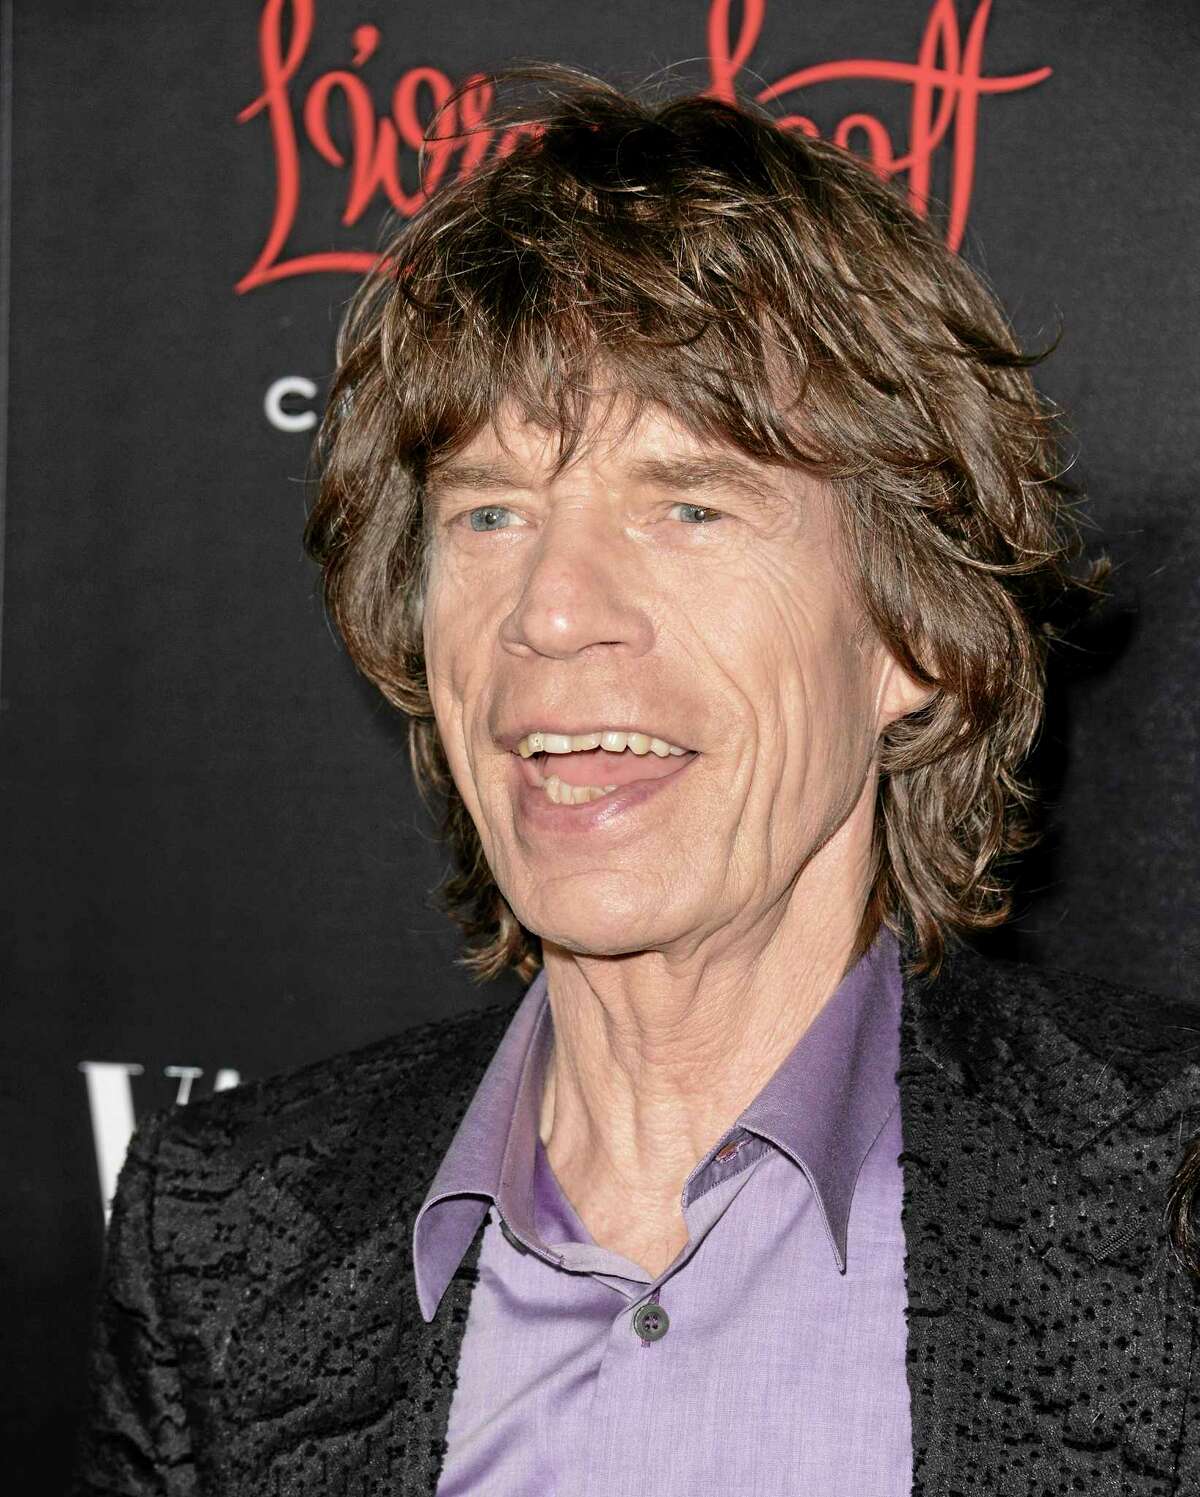 Mick Jagger arrives at the Banana Republic L’Wren Scott Collection launch party at the Chateau Marmont Nov. 19 in West Hollywood, Calif. (Photo by Dan Steinberg/Invision/AP)